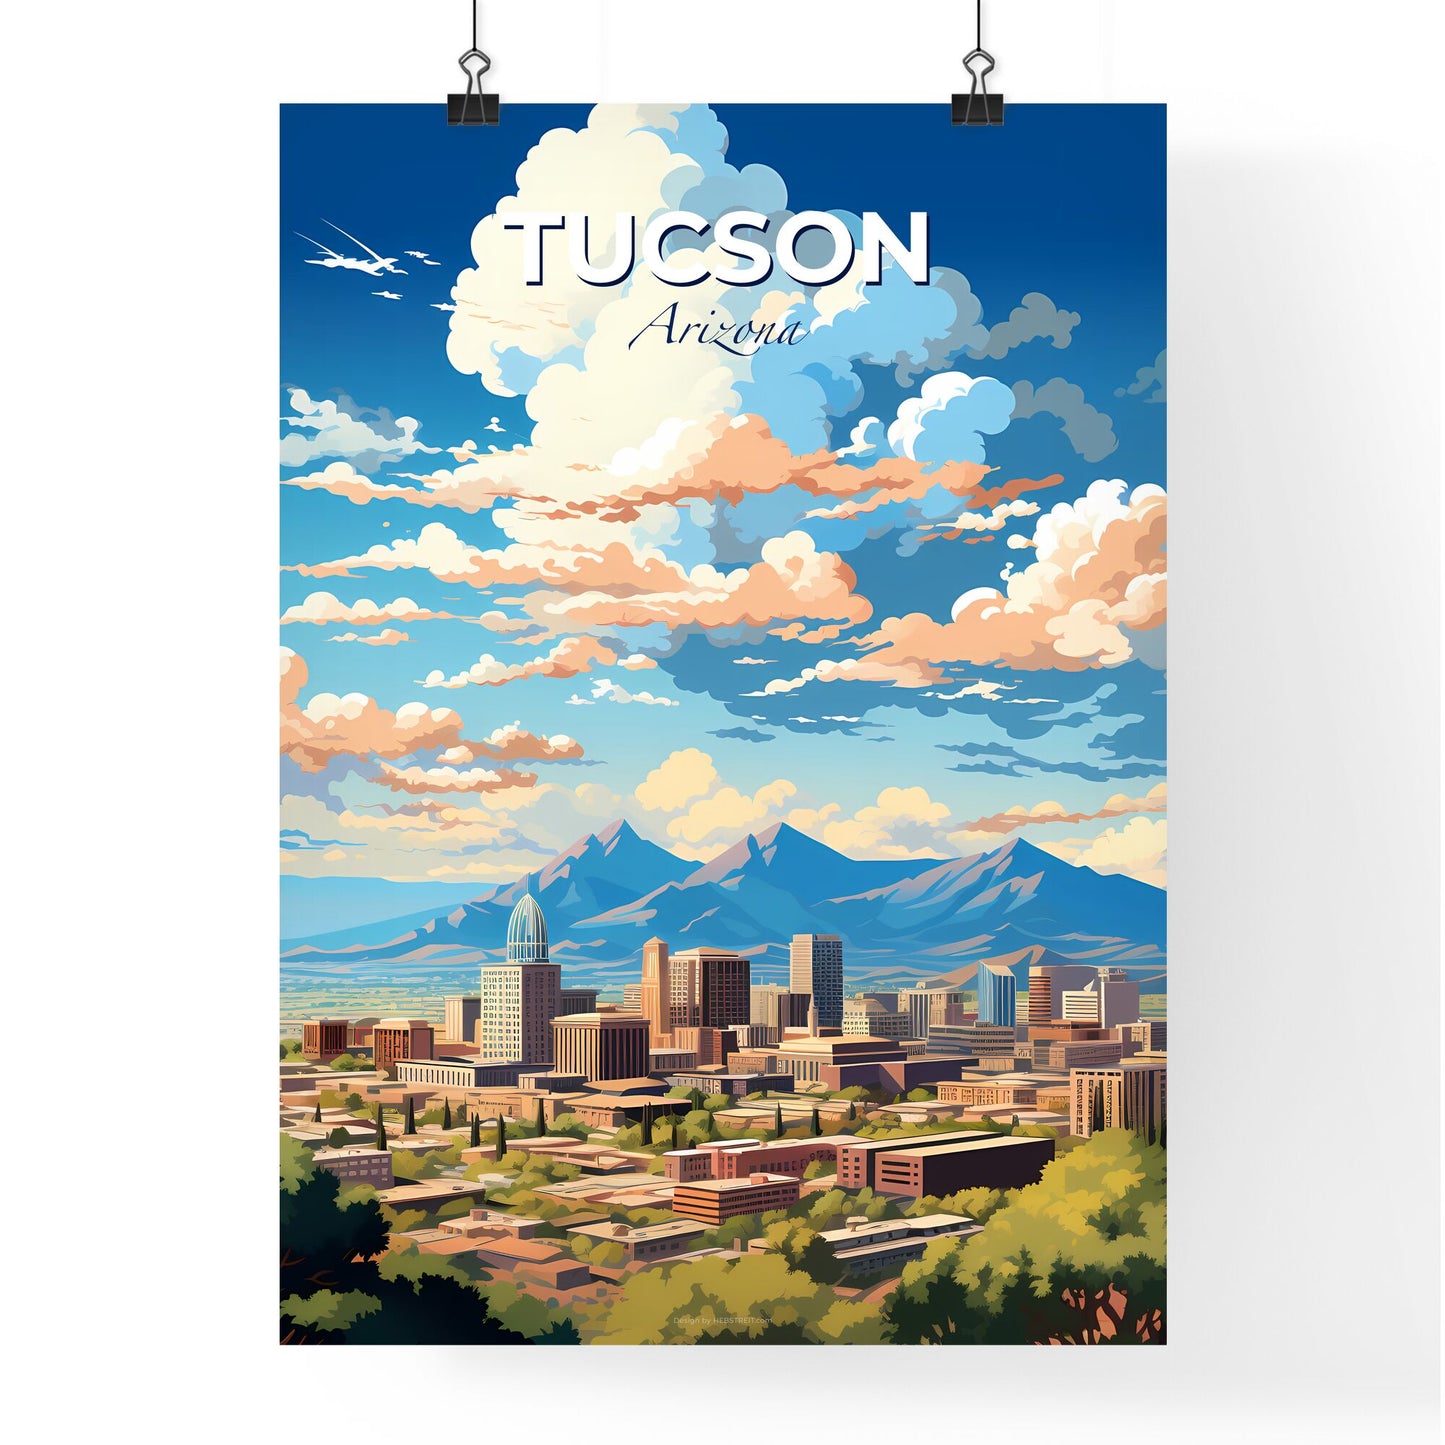 Tucson Arizona Skyline - A City With Mountains In The Background - Customizable Travel Gift Default Title